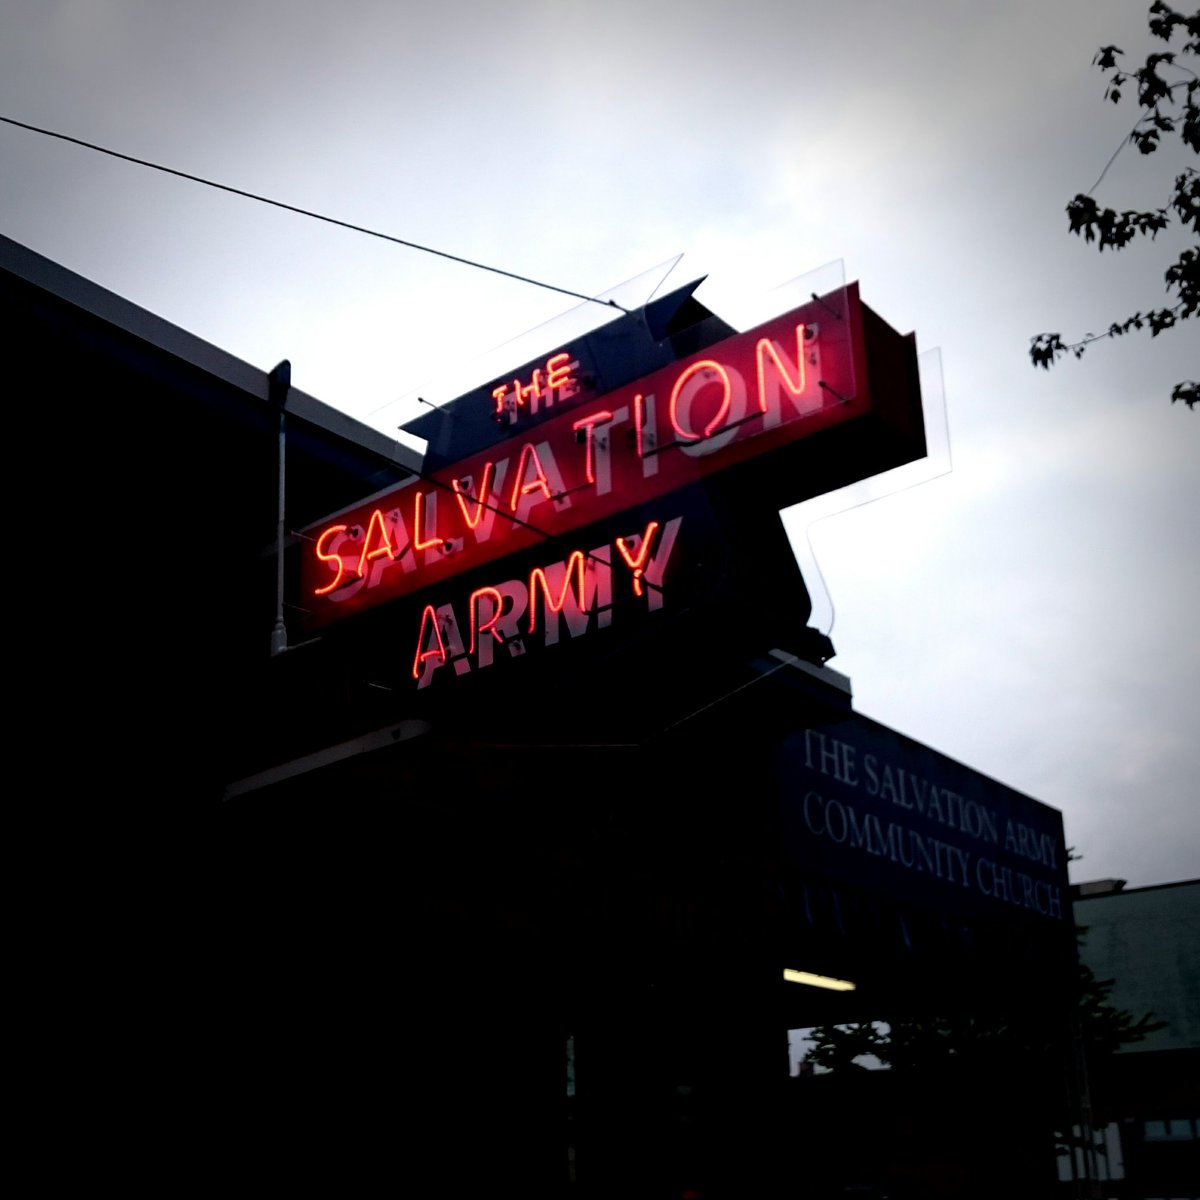 Salvation Army Neon (North Vancouver BC, July 2016)

#NorthVancouver #UpperLonsdale #SalvationArmy #Neon #Photography